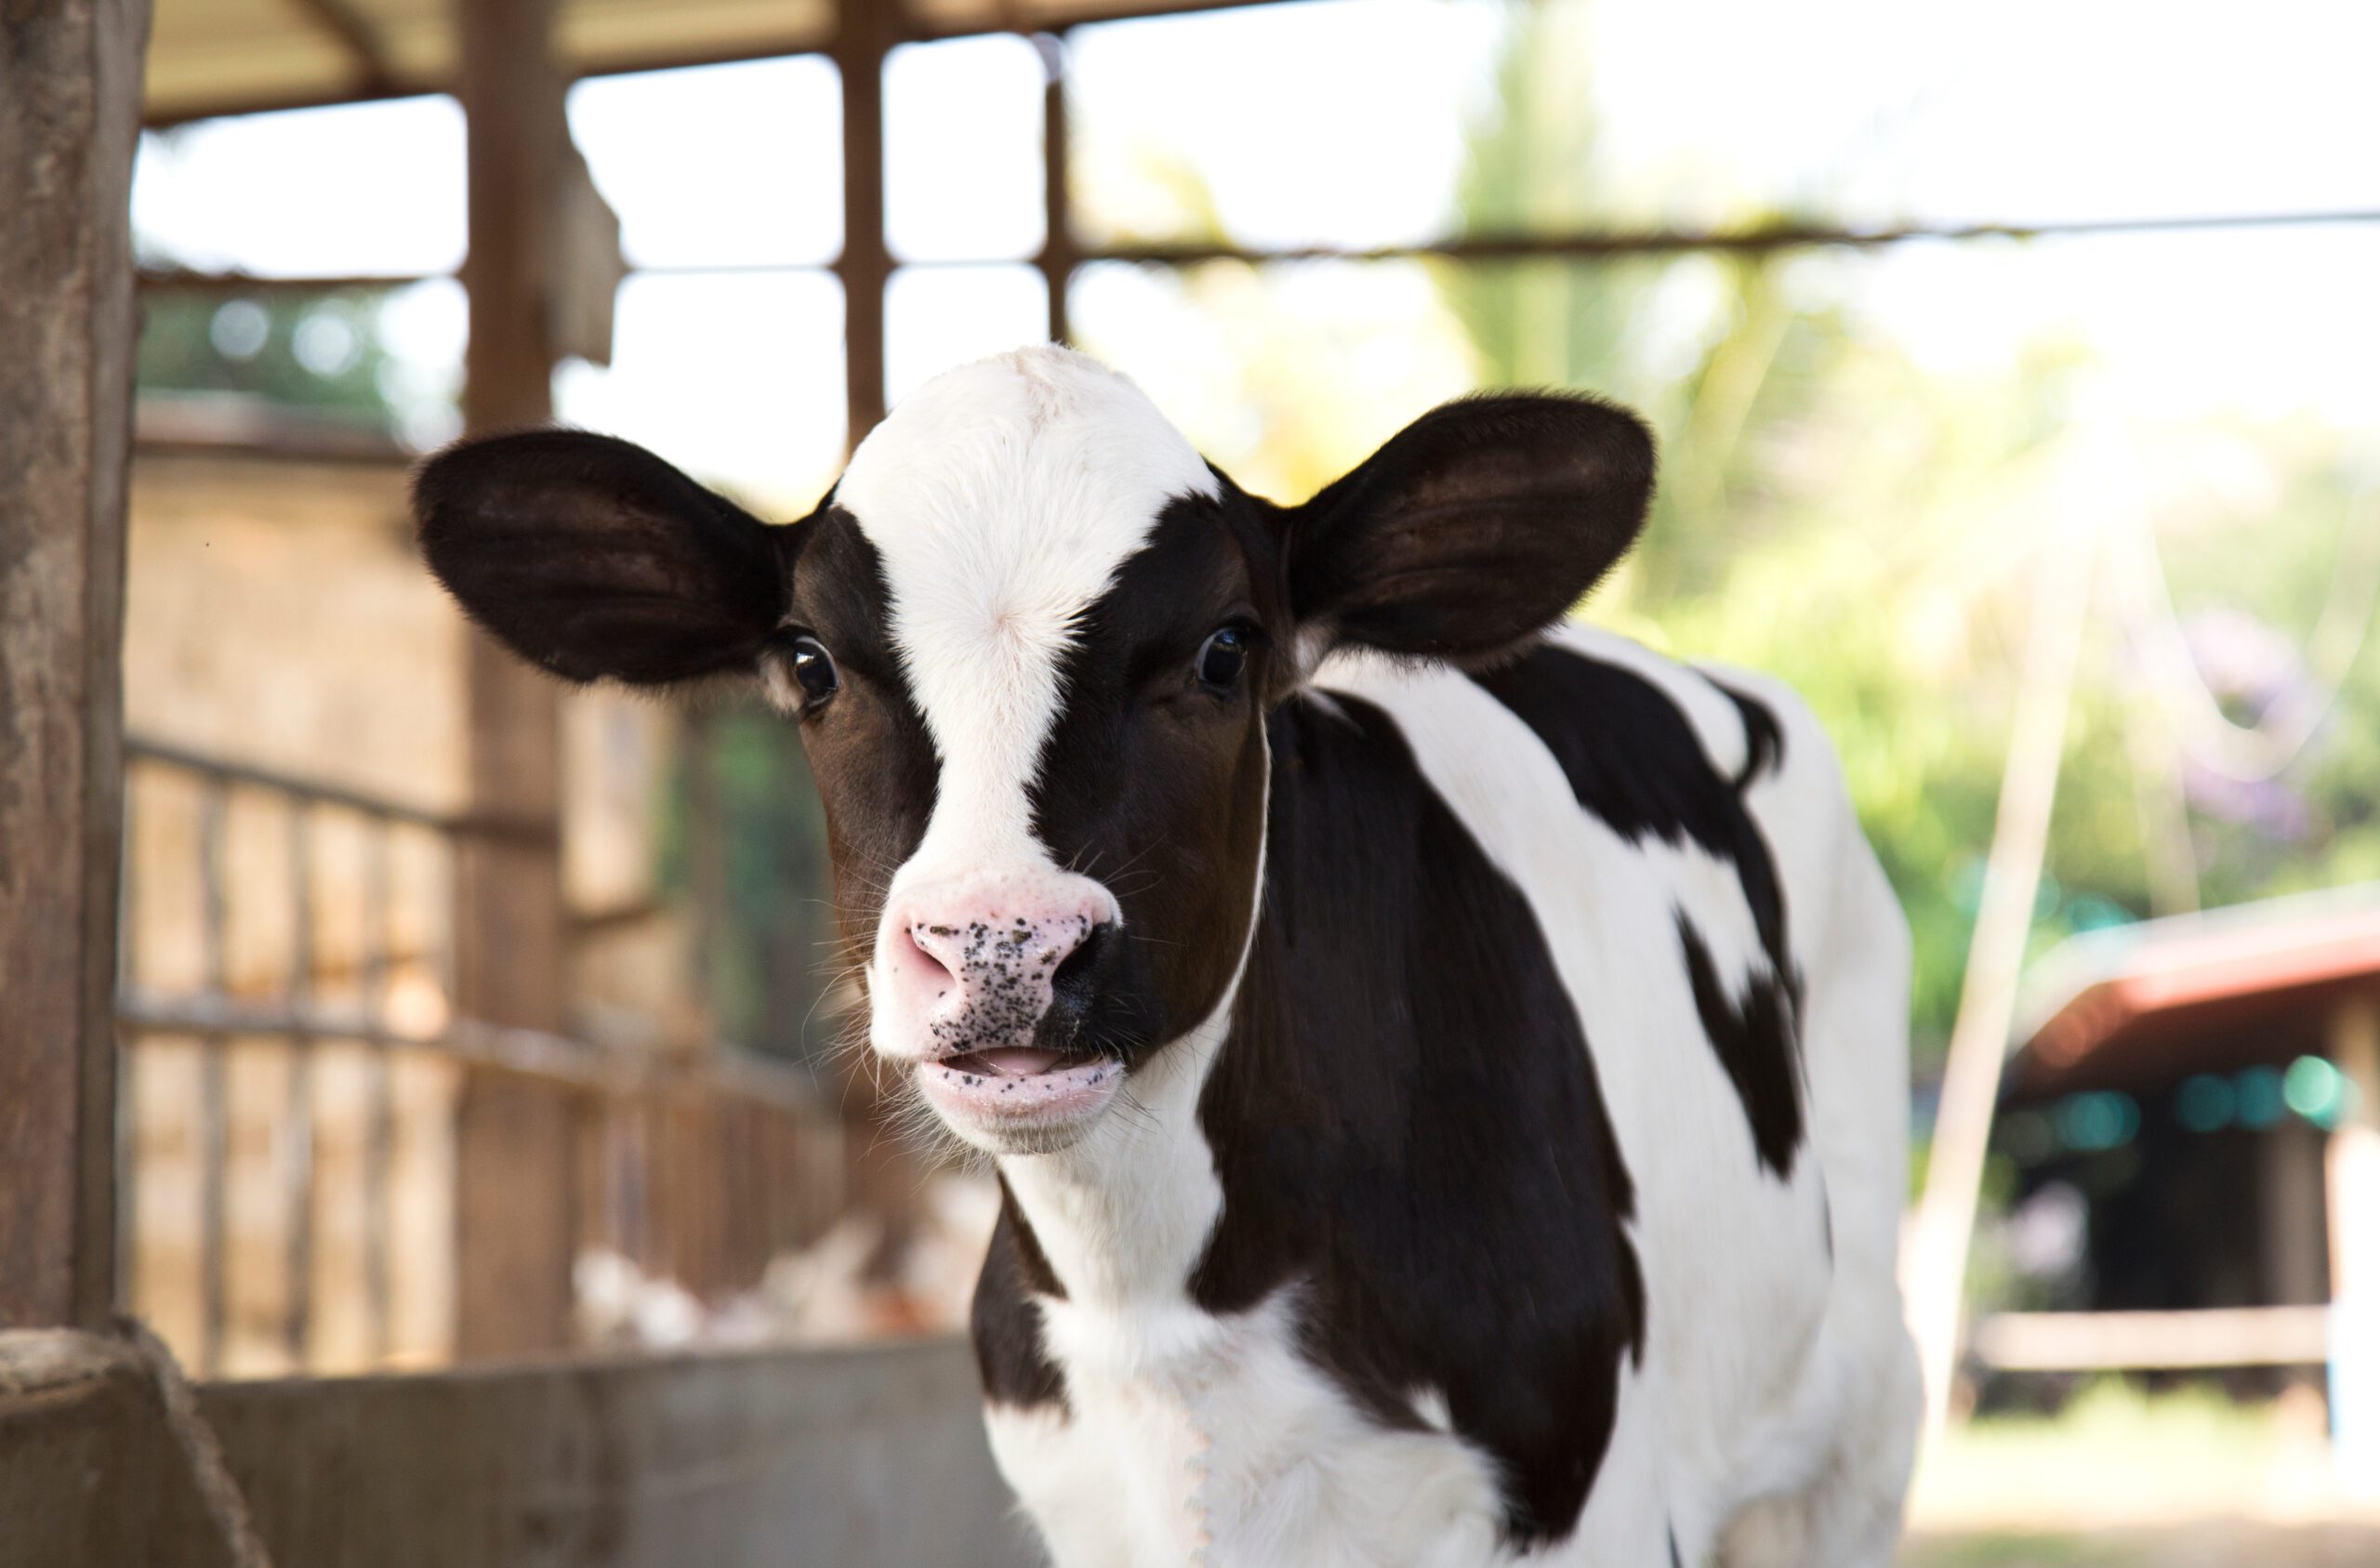 USE OF SENSORY ADDITIVES TO MASK BITTER TASTE IN CALF MILK REPLACERS